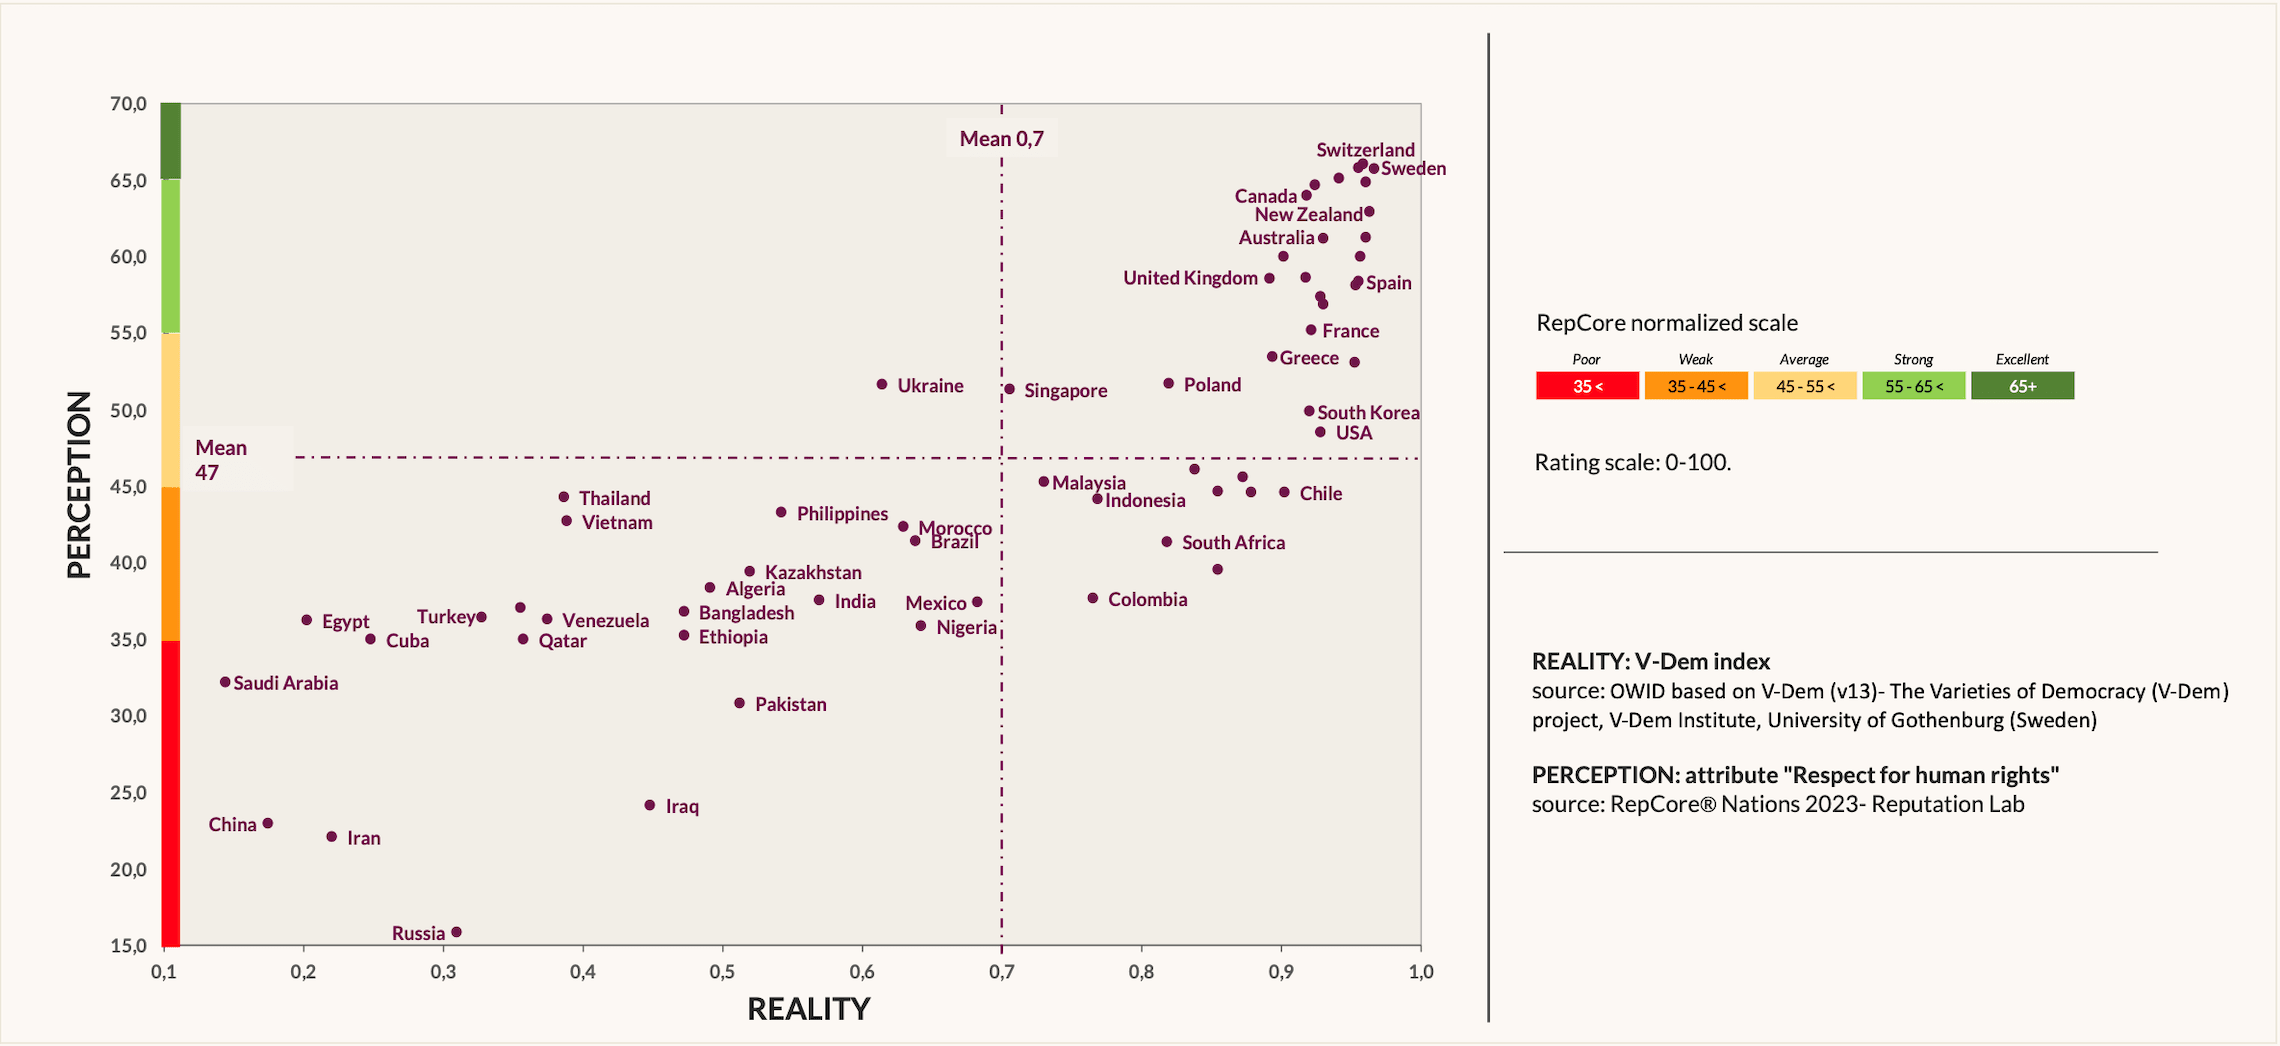 A chart that compares the reality of a country's V-Dem Index (the Varieties of Democracy project), against the perception of the country's respect for human rights. There is a clear positive correlation between perception and reality.